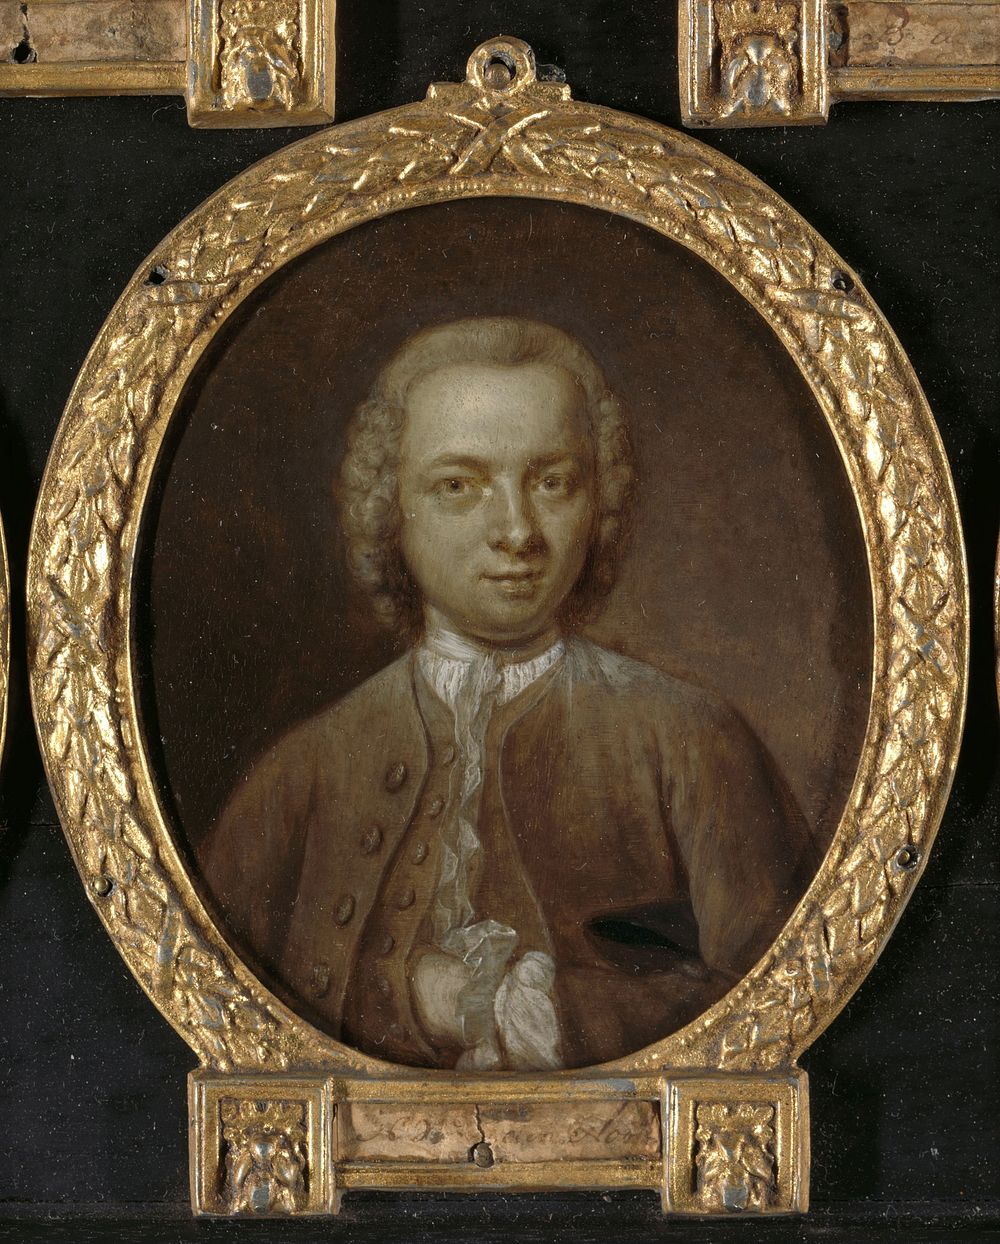 Portrait of Nicolaas Willem op den Hooff, Physician and Translator in Amsterdam (1732 - 1771) by Jan Maurits Quinkhard